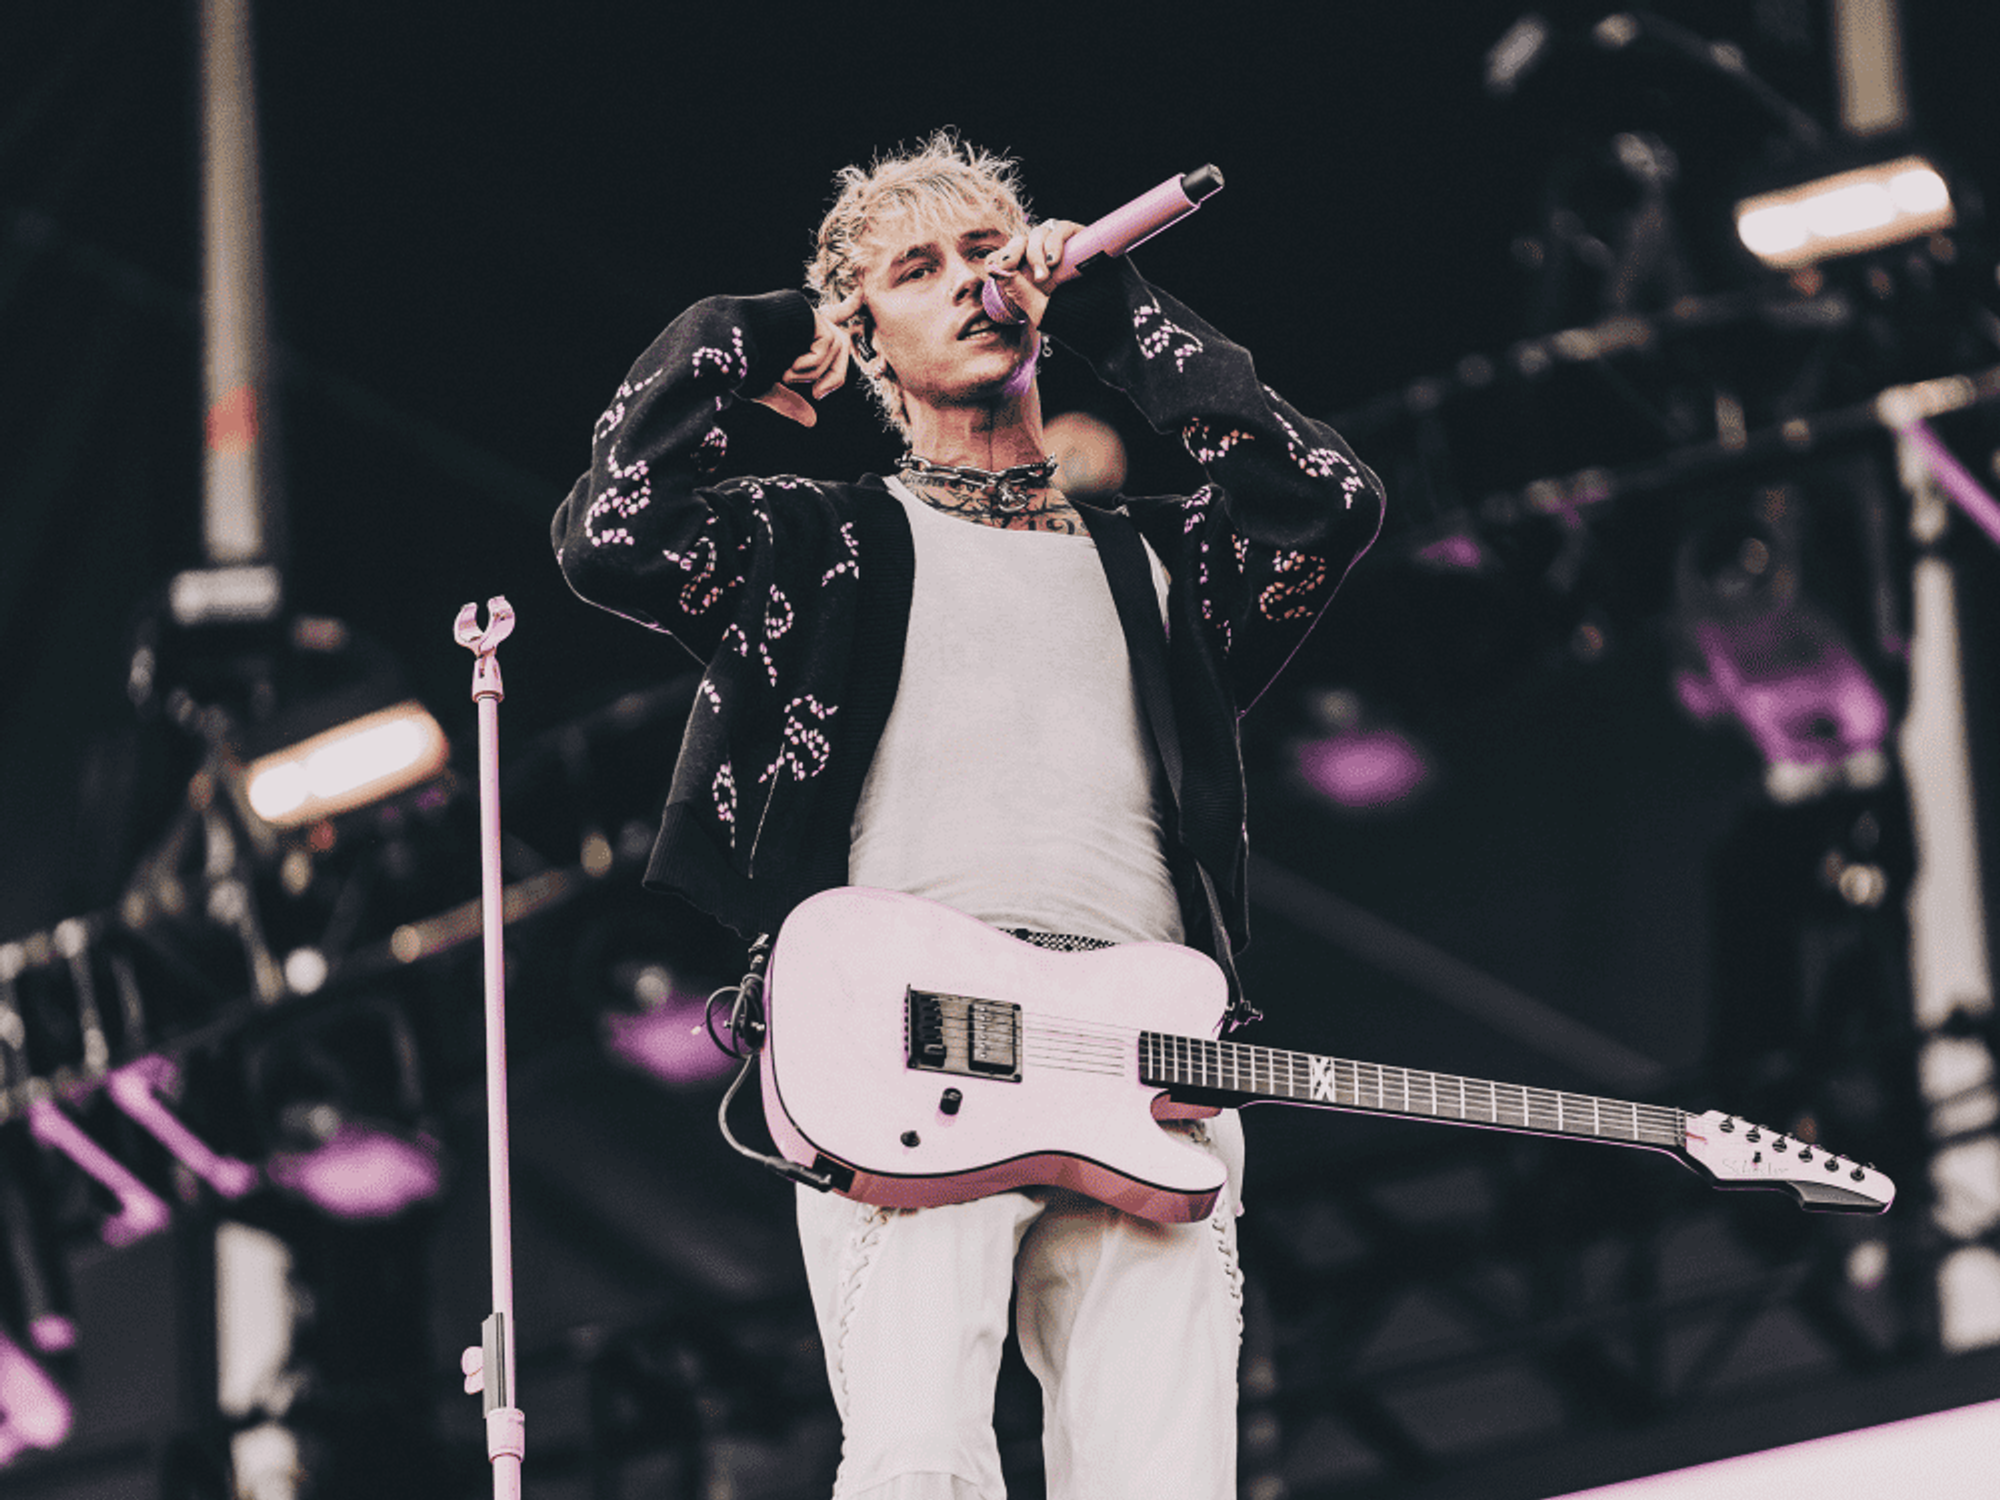 Machine Gun Kelly will play at at The Pavilion at Toyota Music Factory in Irving on October 24.